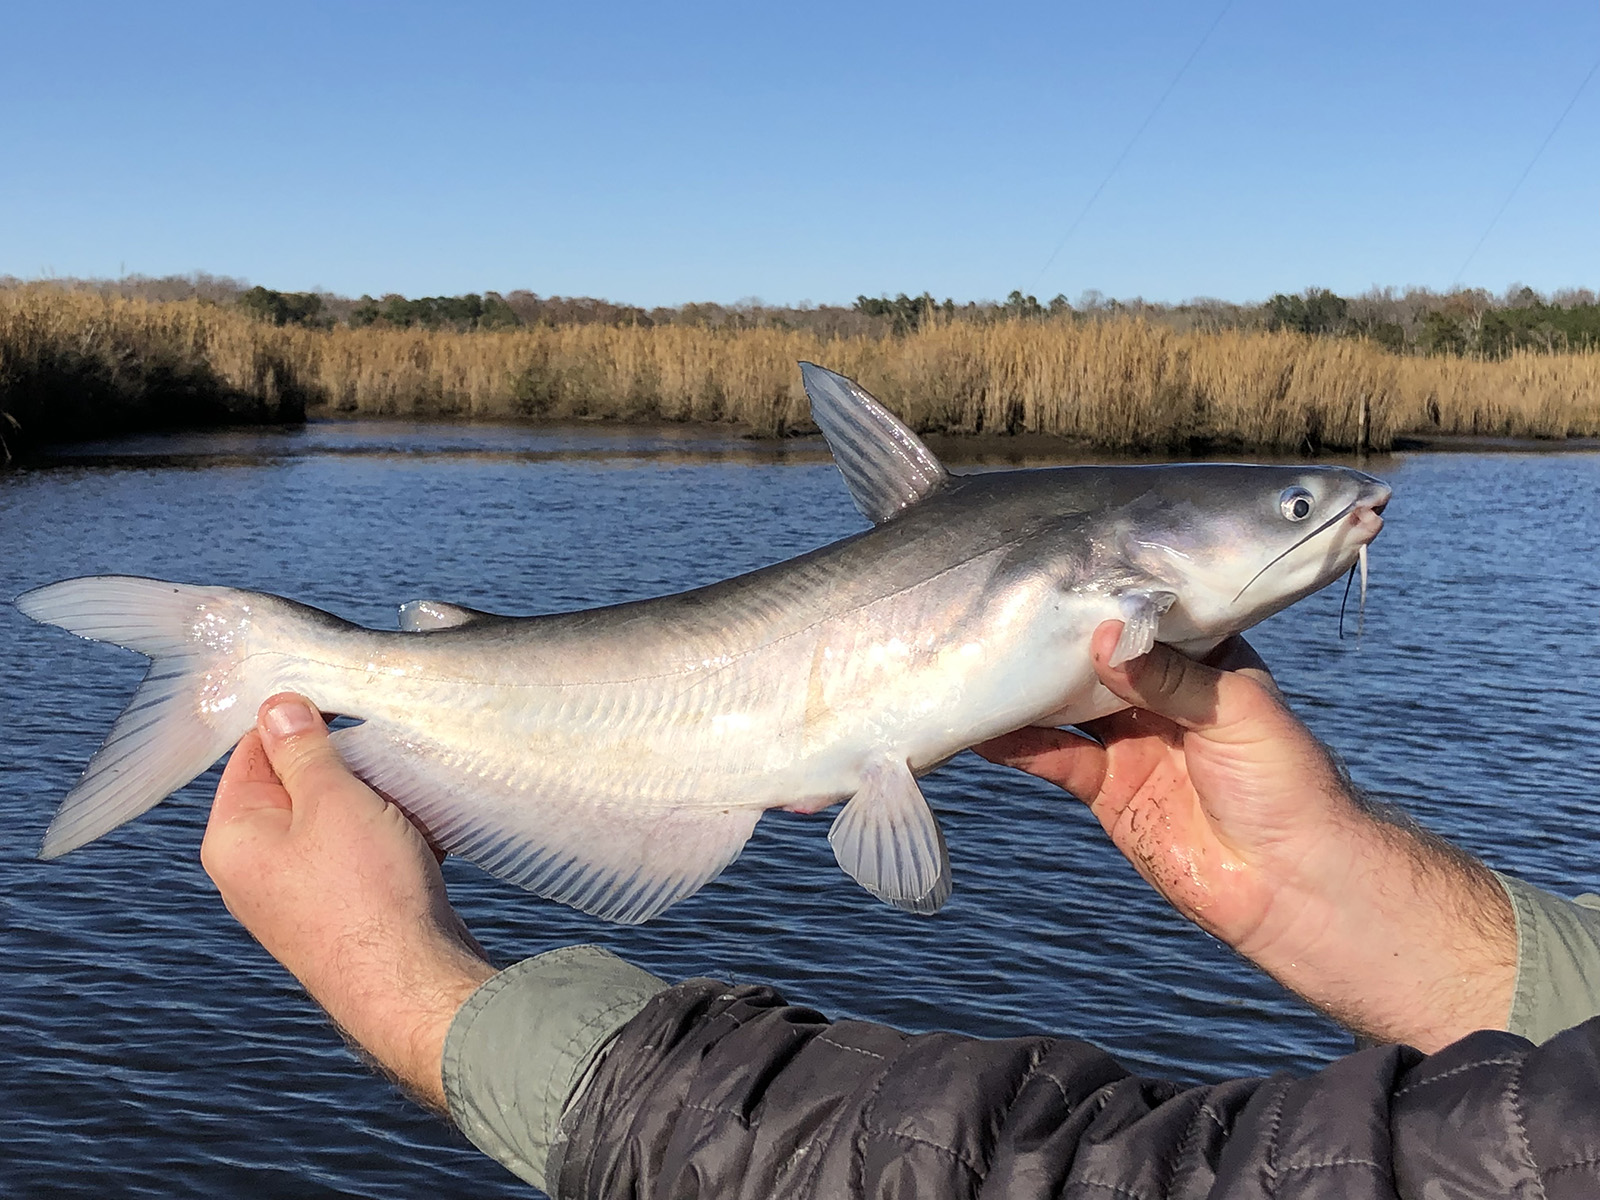 A photo of a medium-size blue catfish held up out of the water by an angler, with riverbank in the background.